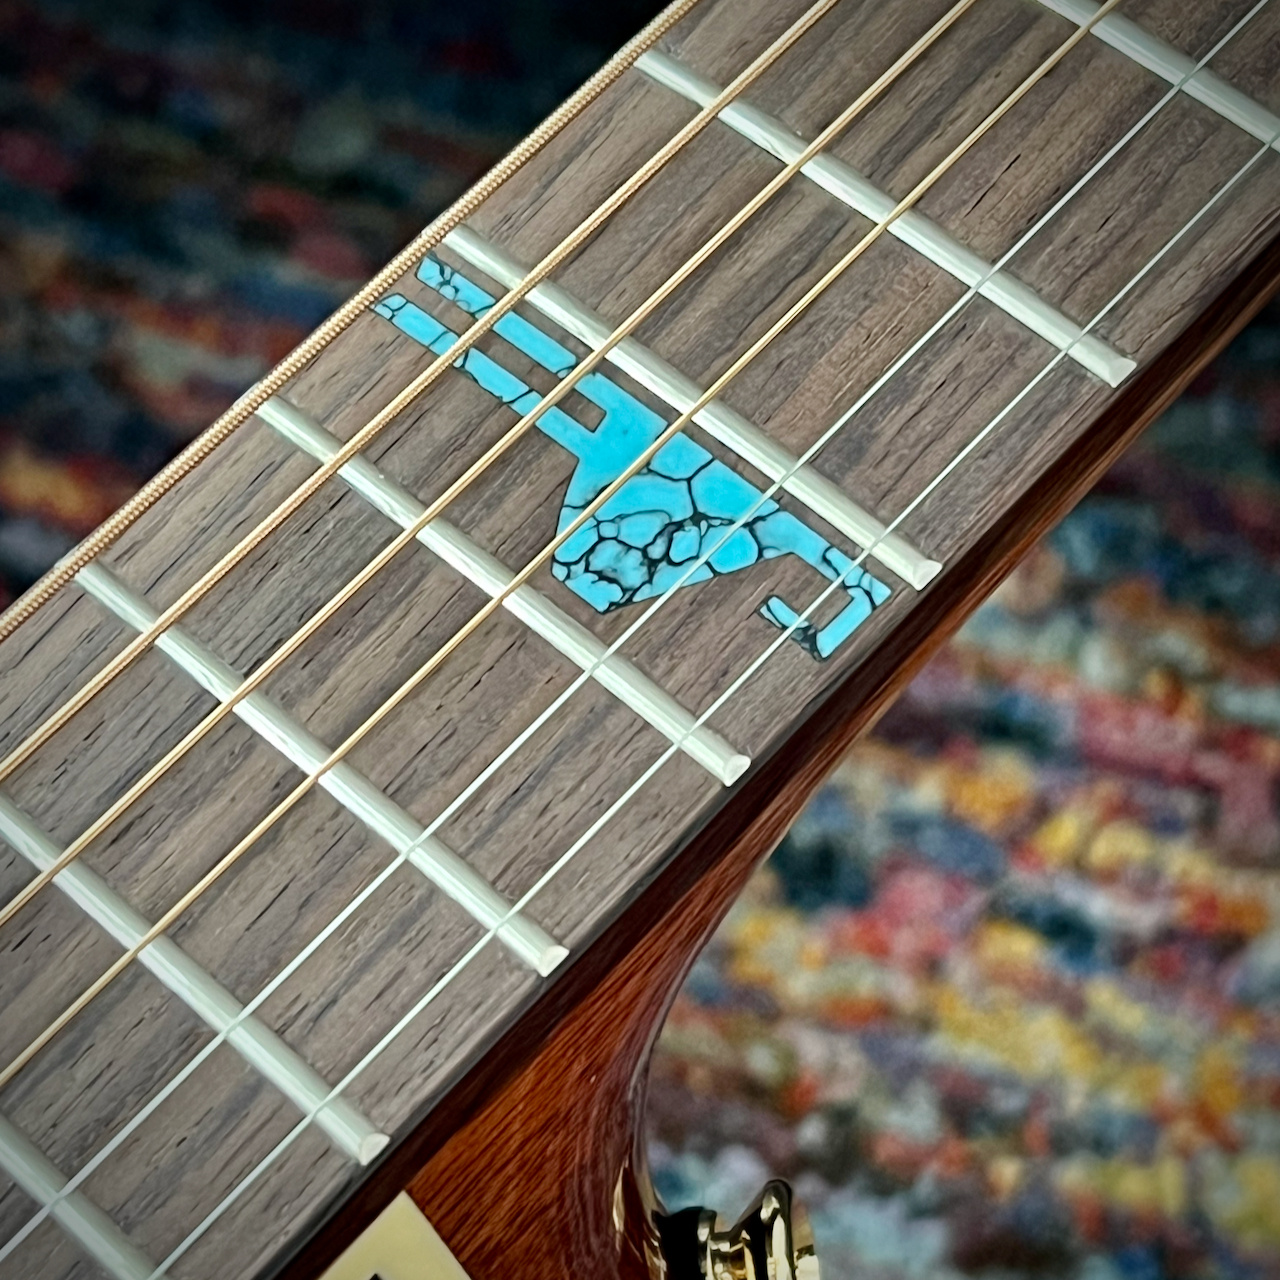 Takamine TSF40C Santa Fe Acoustic with Semi-Hard Case, Turquoise Inlay, Cool Tube Electronics (Made in Japan)